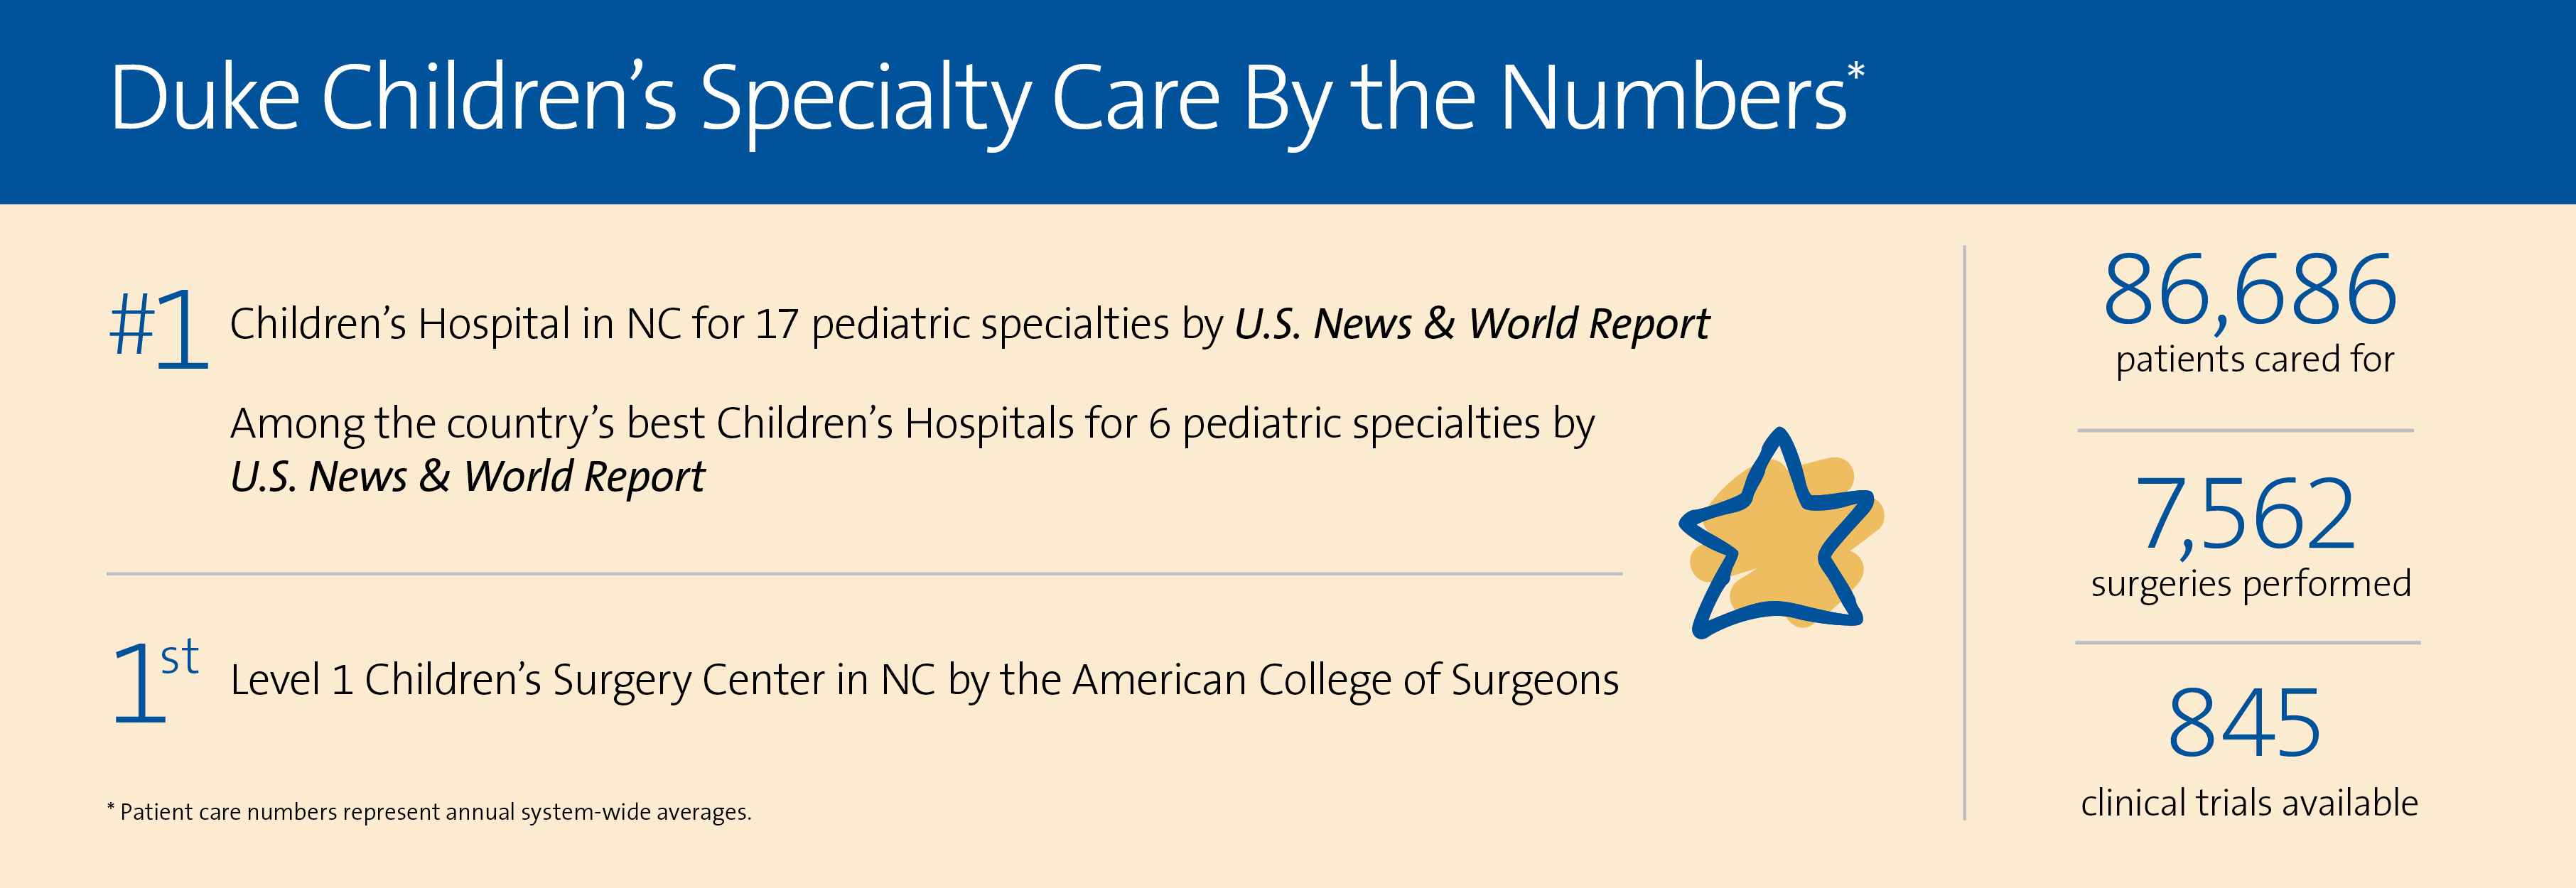 Duke Children's specialty care by the numbers